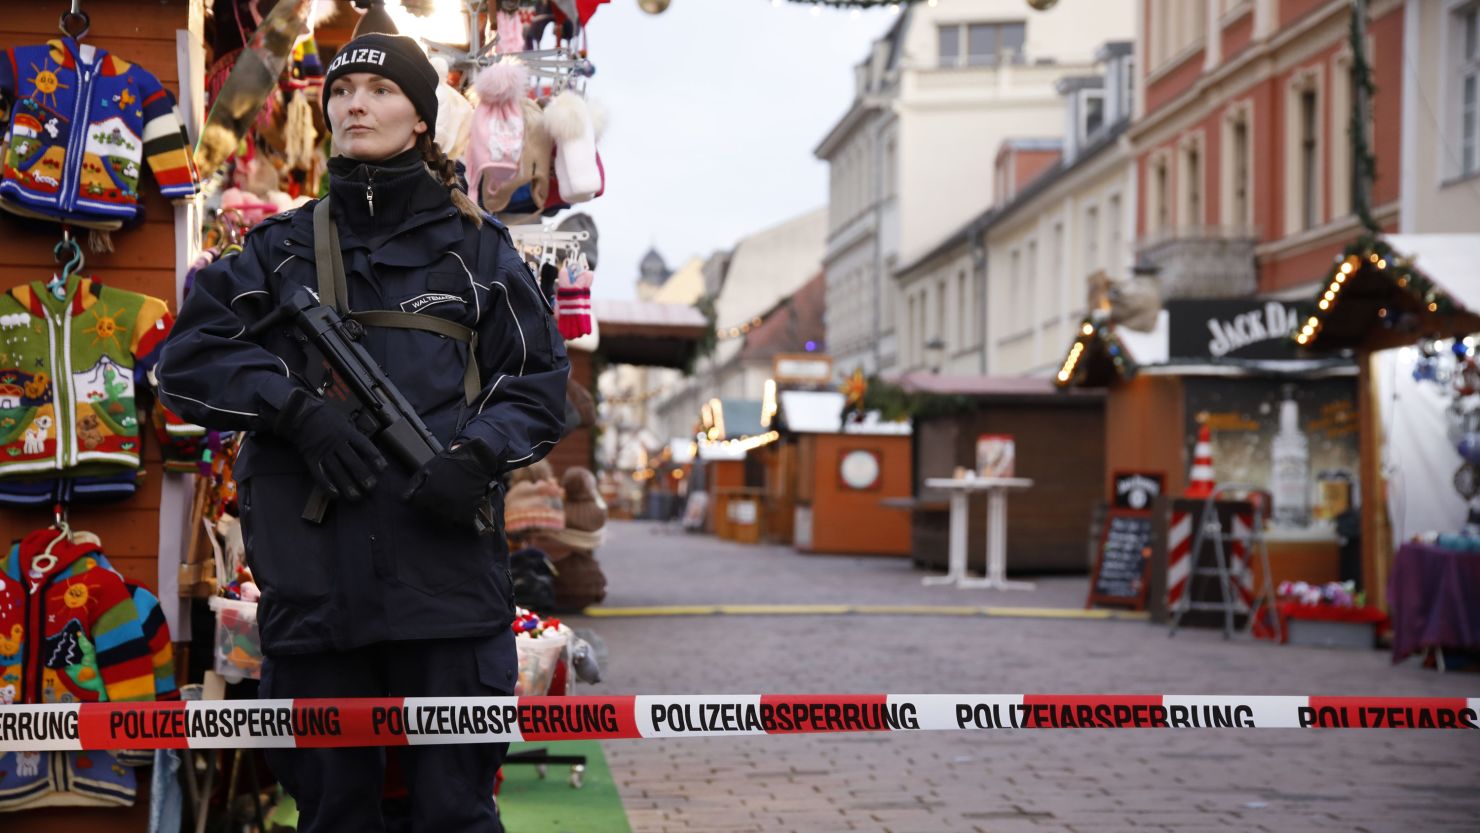 A police officer stands guard at the Potsdam Christmas market after it was evacuated.